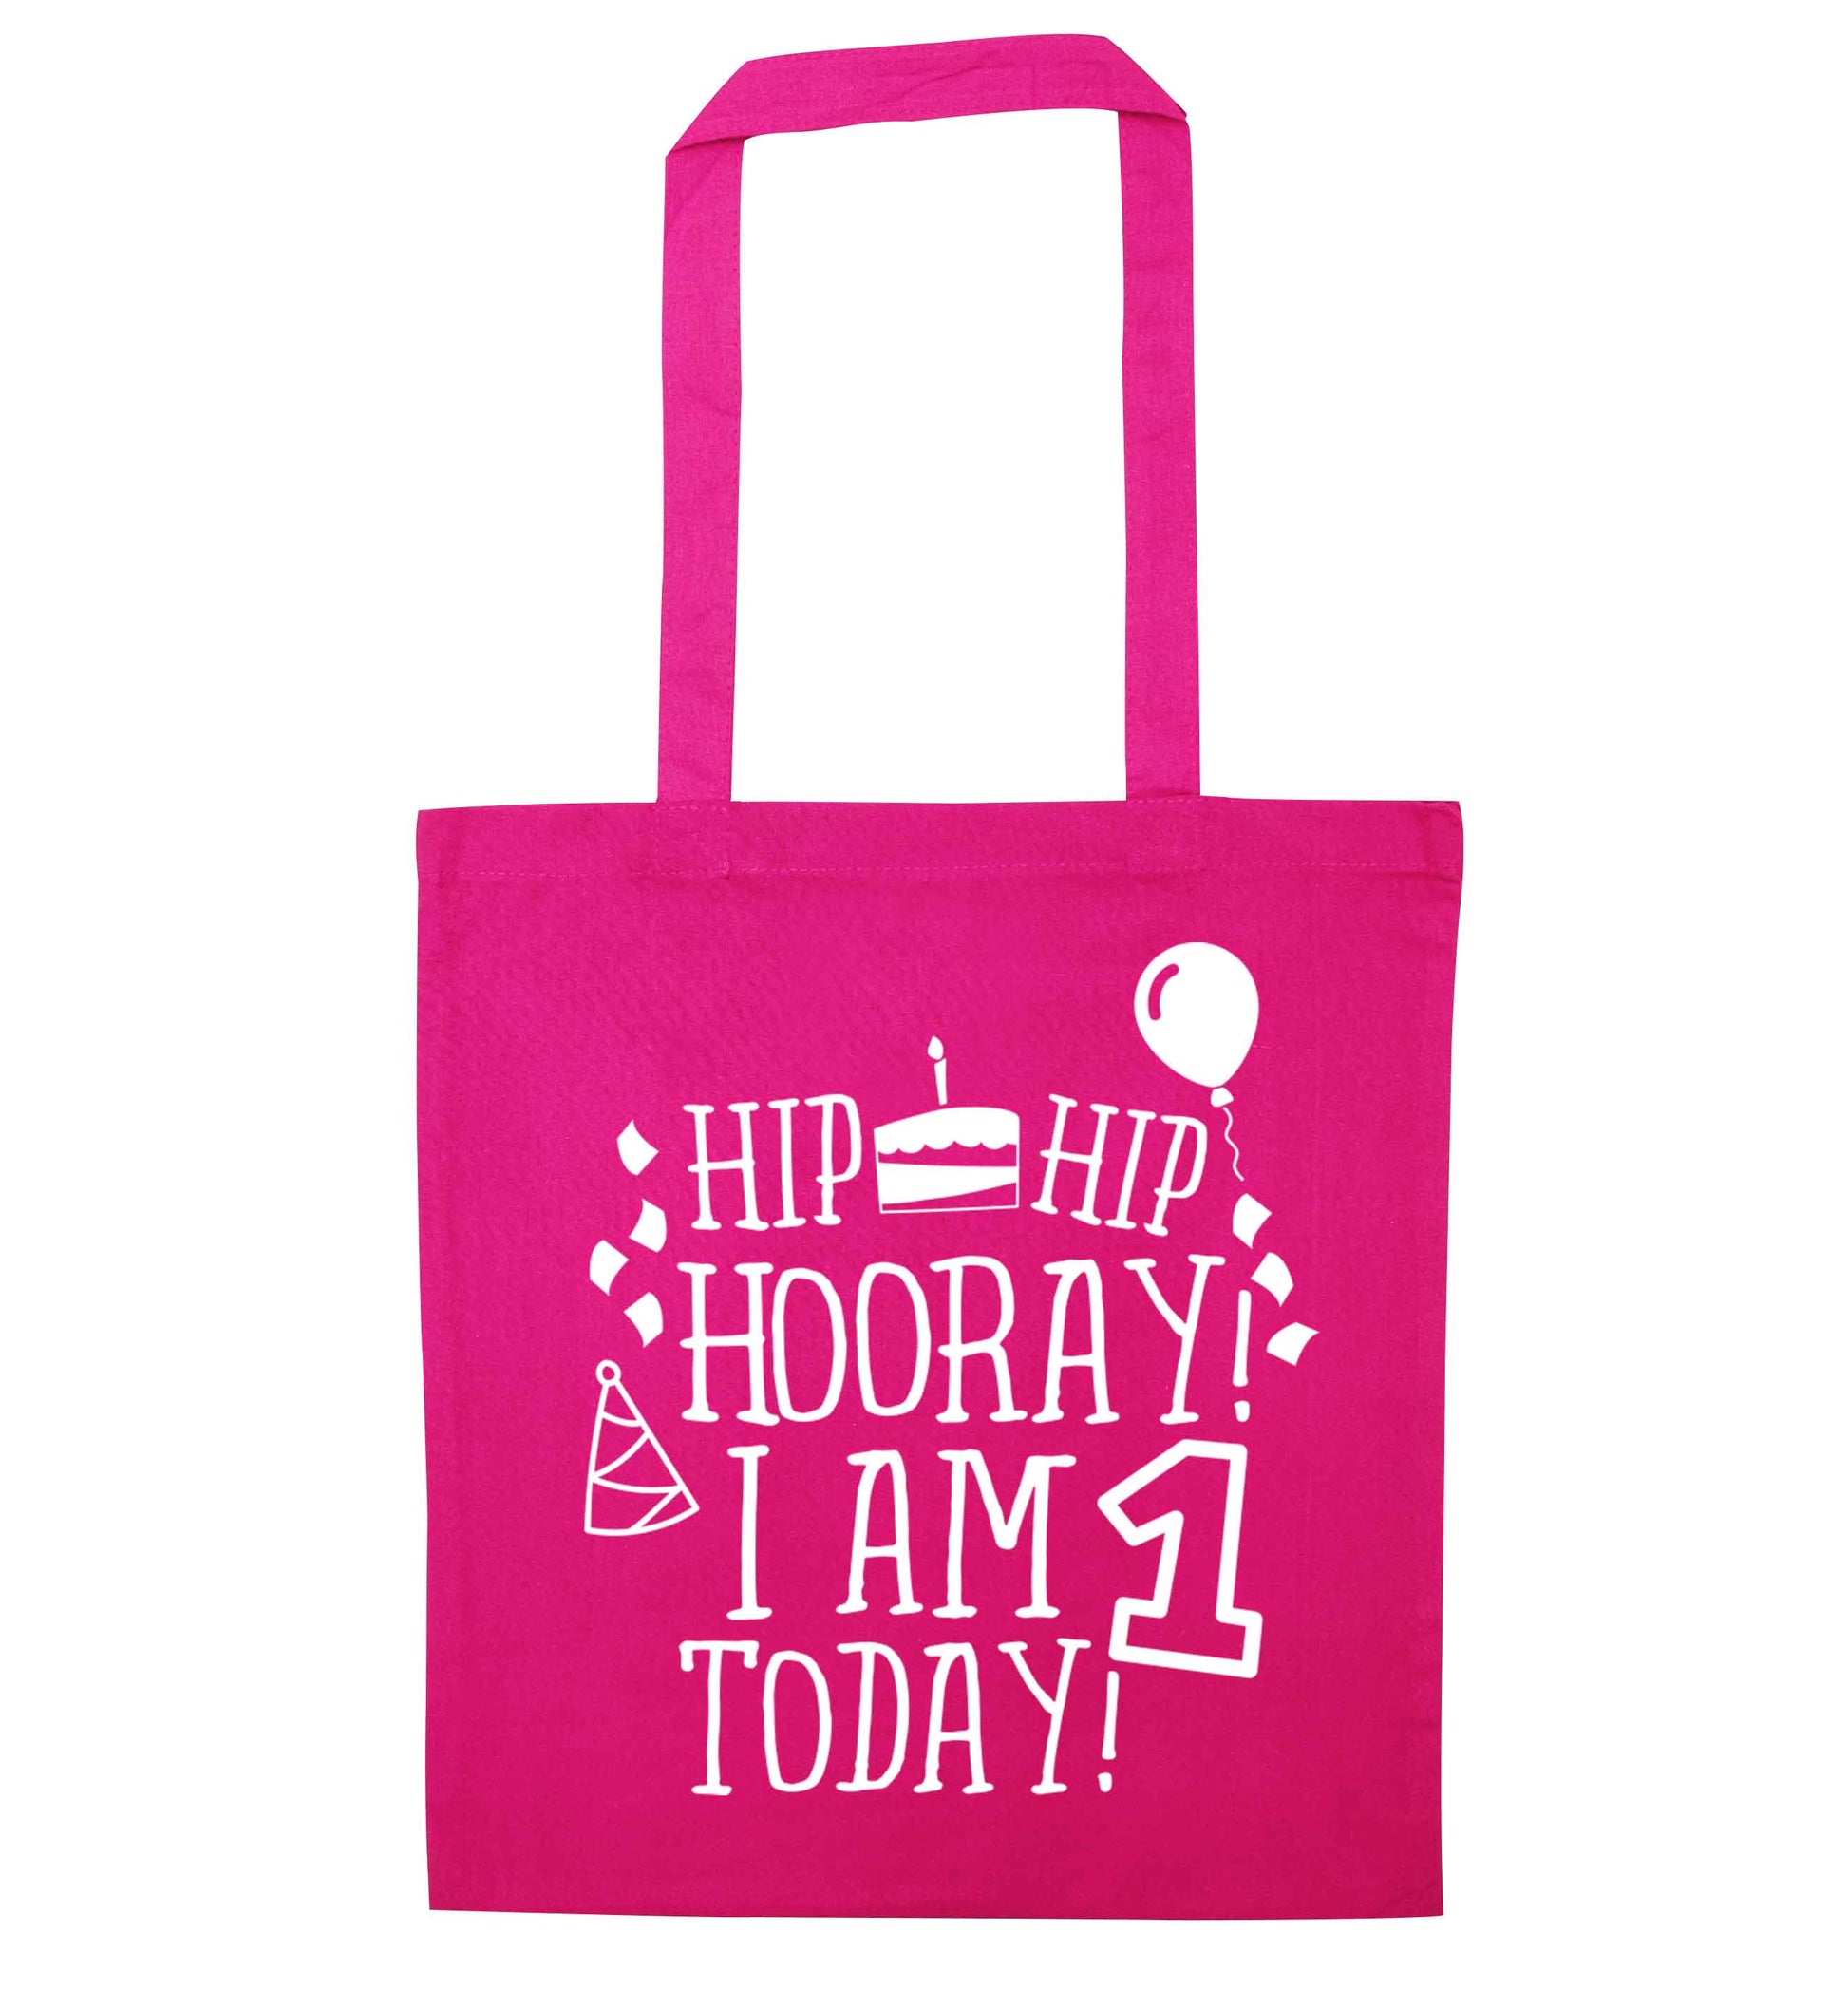 I am One Today pink tote bag